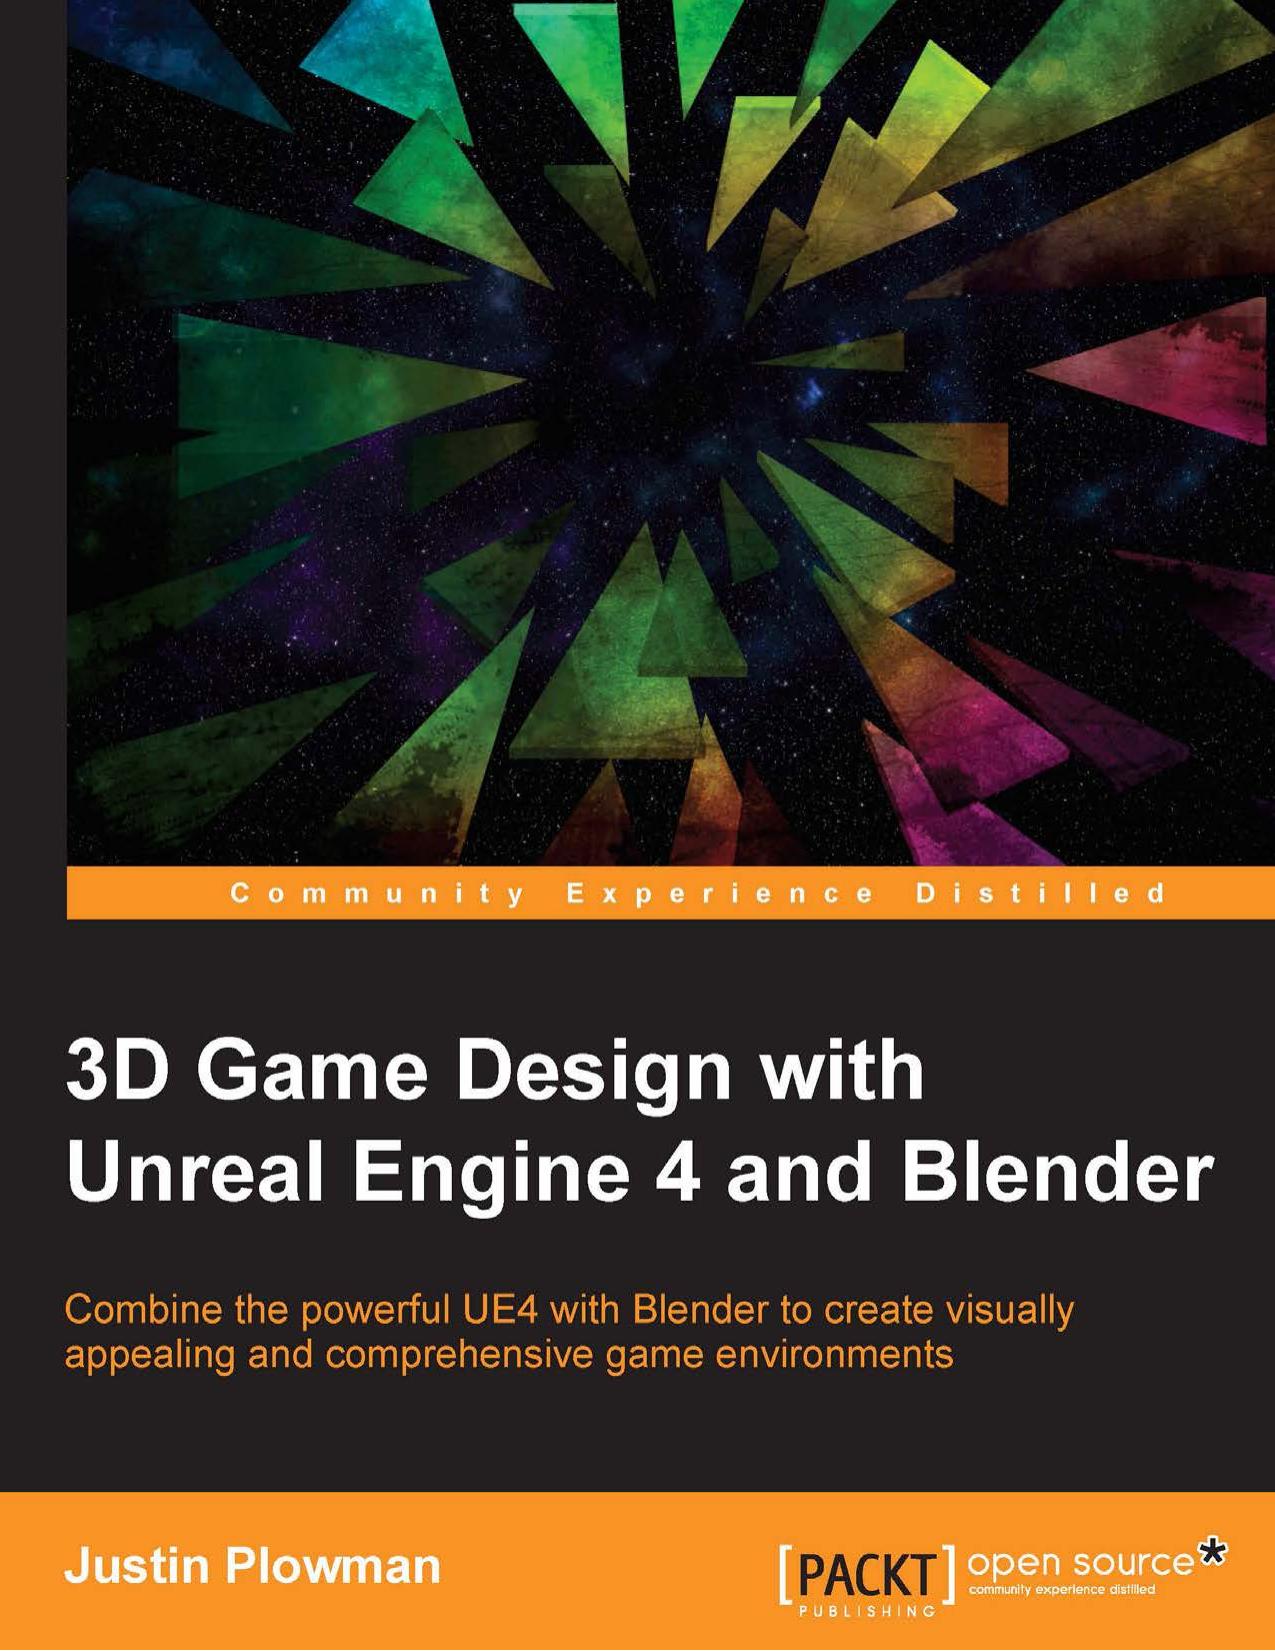 3D Game Design with Unreal Engine 4 and Blender by Justin Plowman